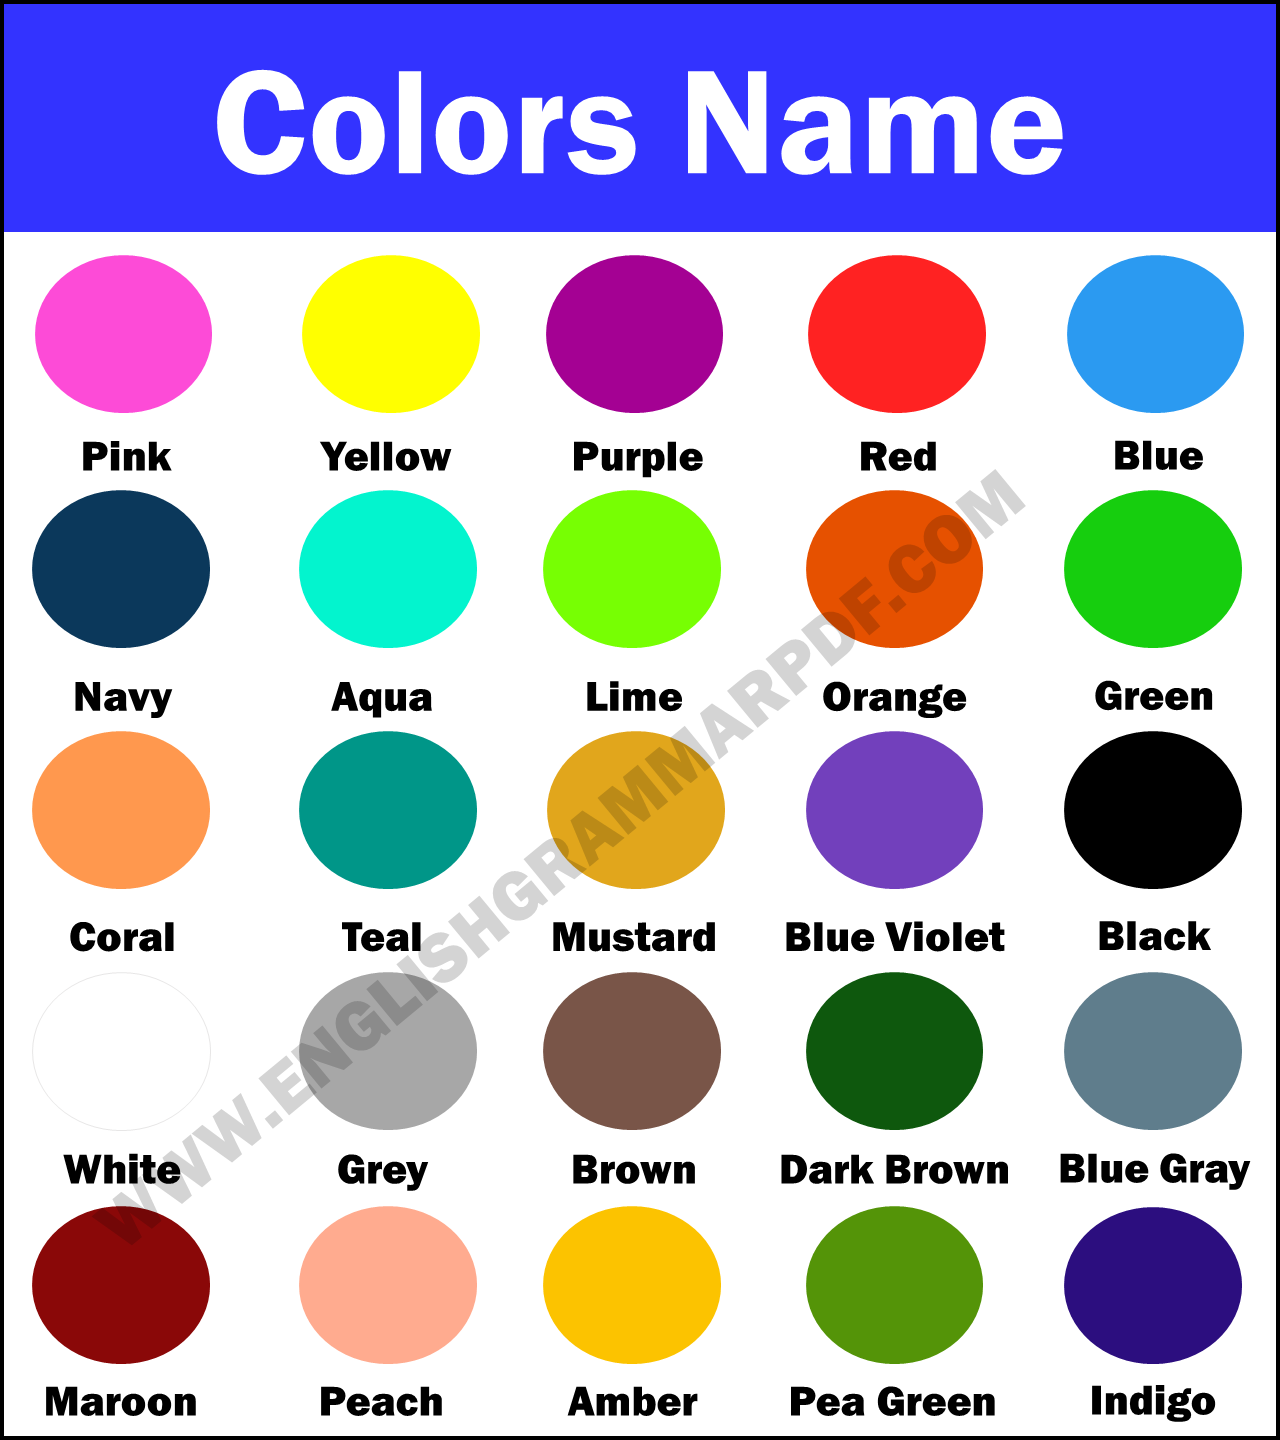 Colors Name